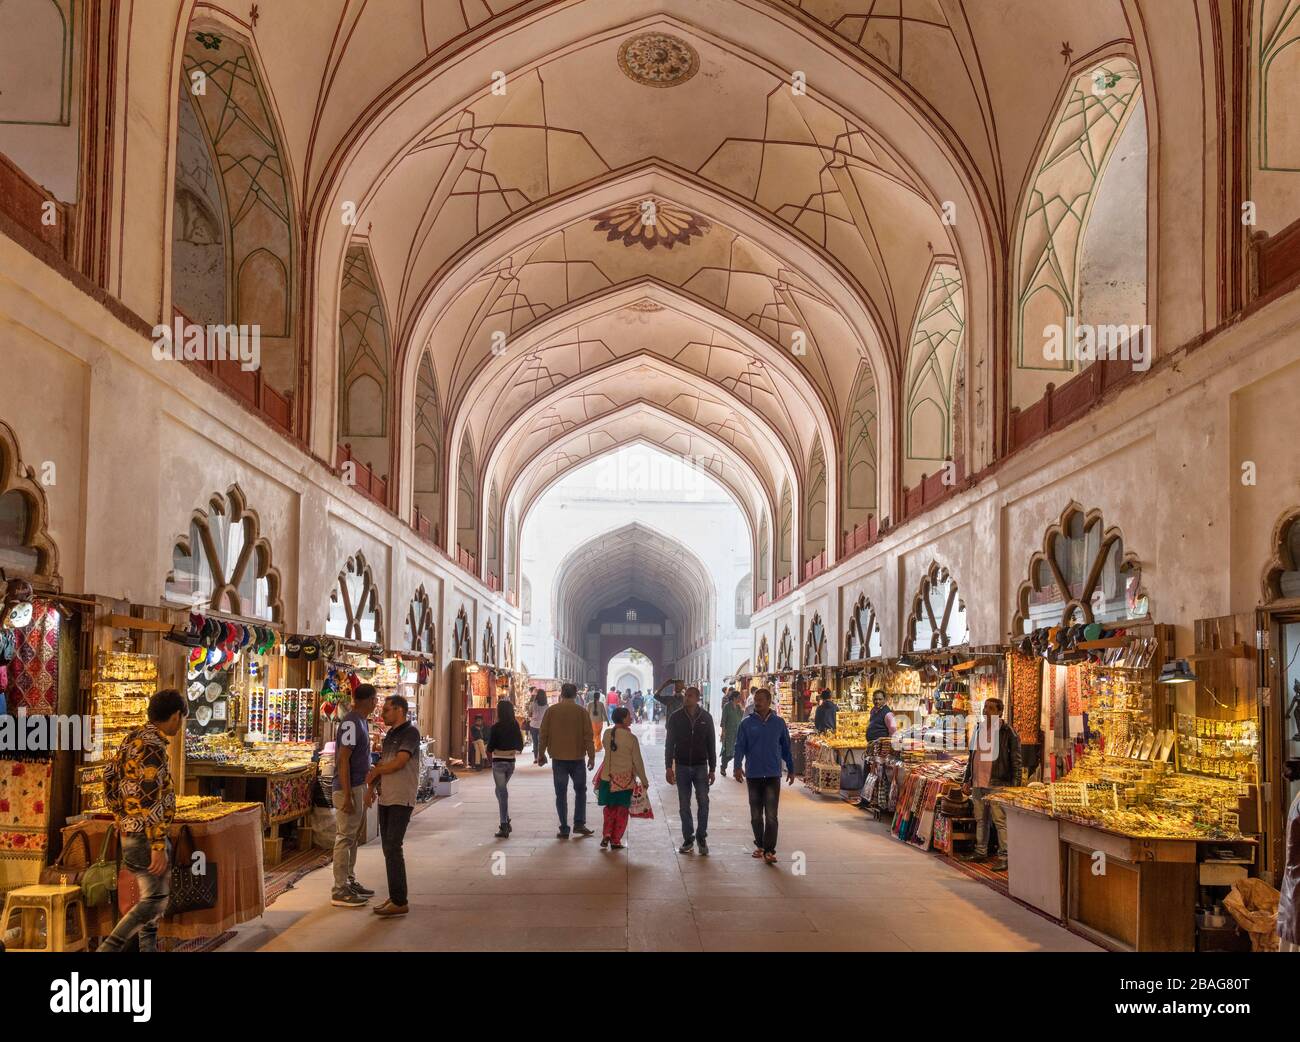 The Chatta Chowk (Covered Bazaar) in the Red Fort, Delhi, India Stock Photo